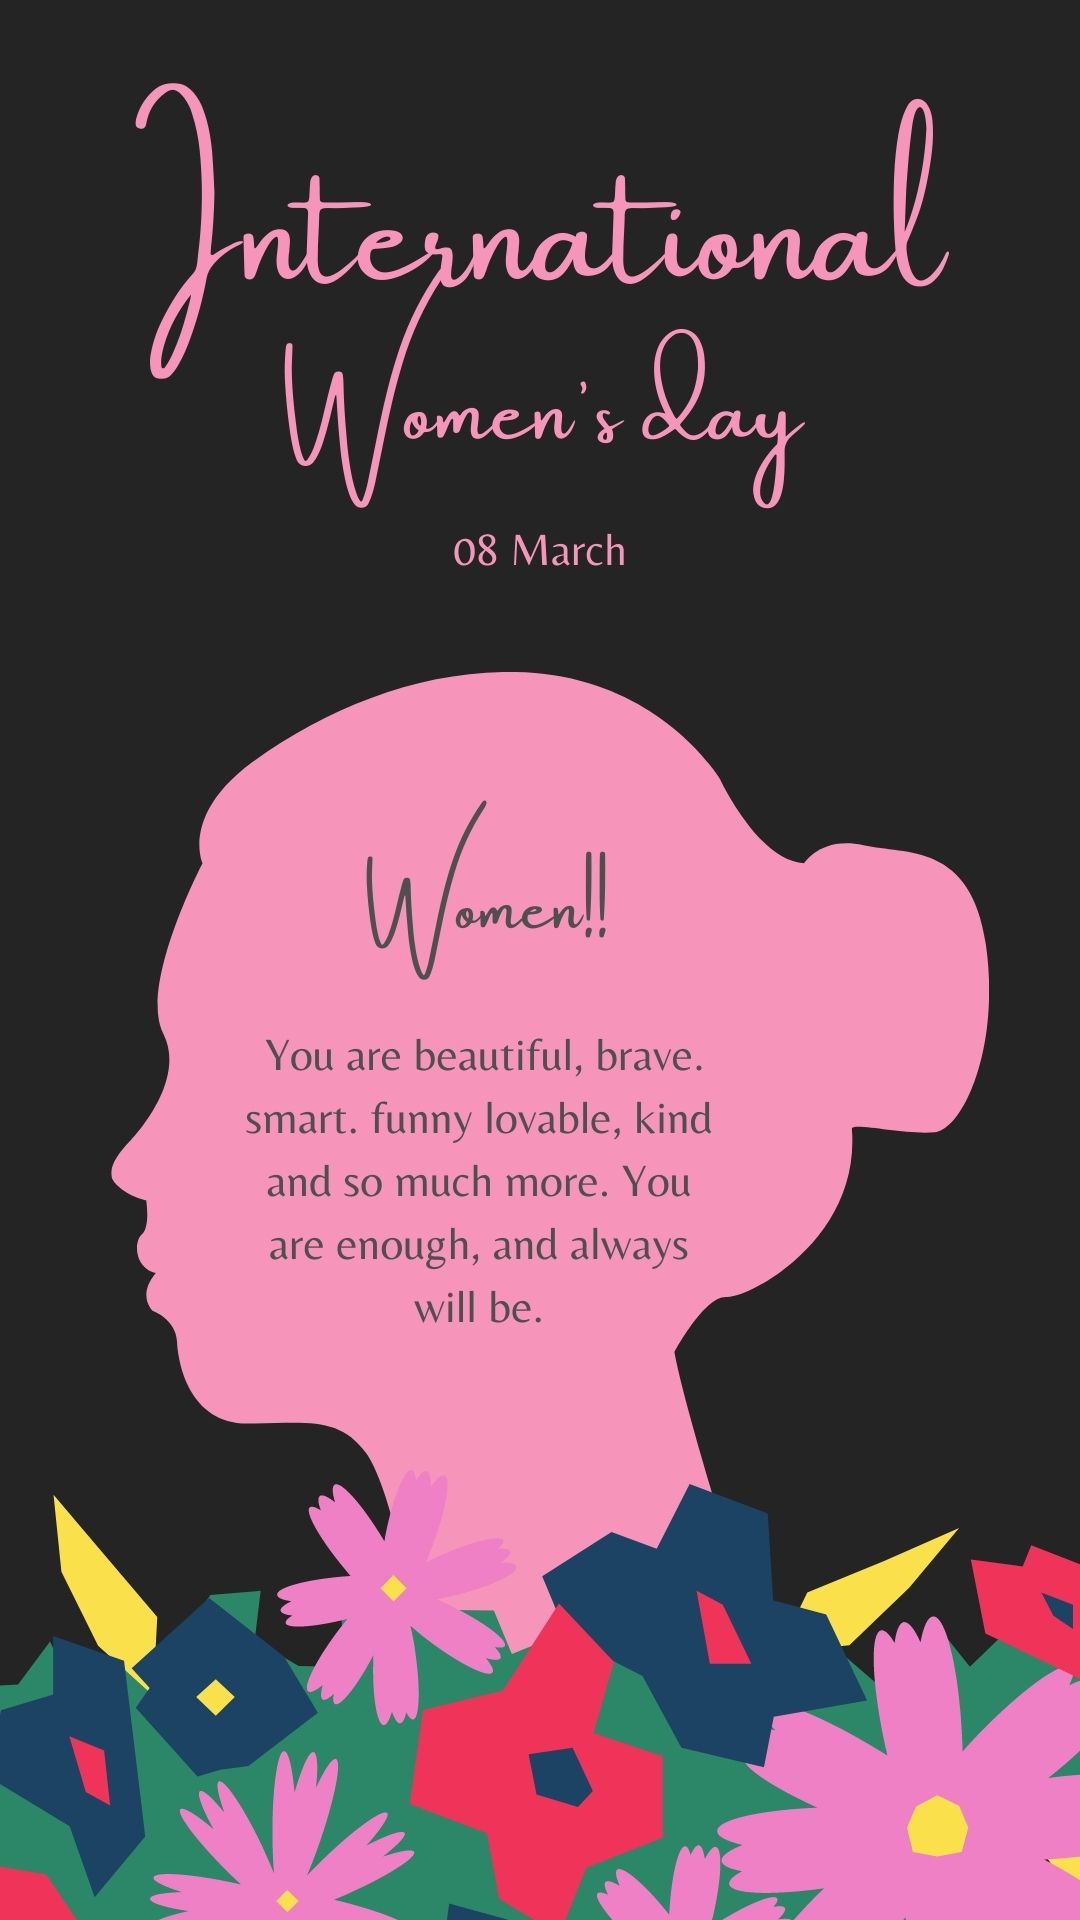 Happy International Women's Day 2022: Wishes, Image, Status, Quotes, Messages and WhatsApp Greetings to Share